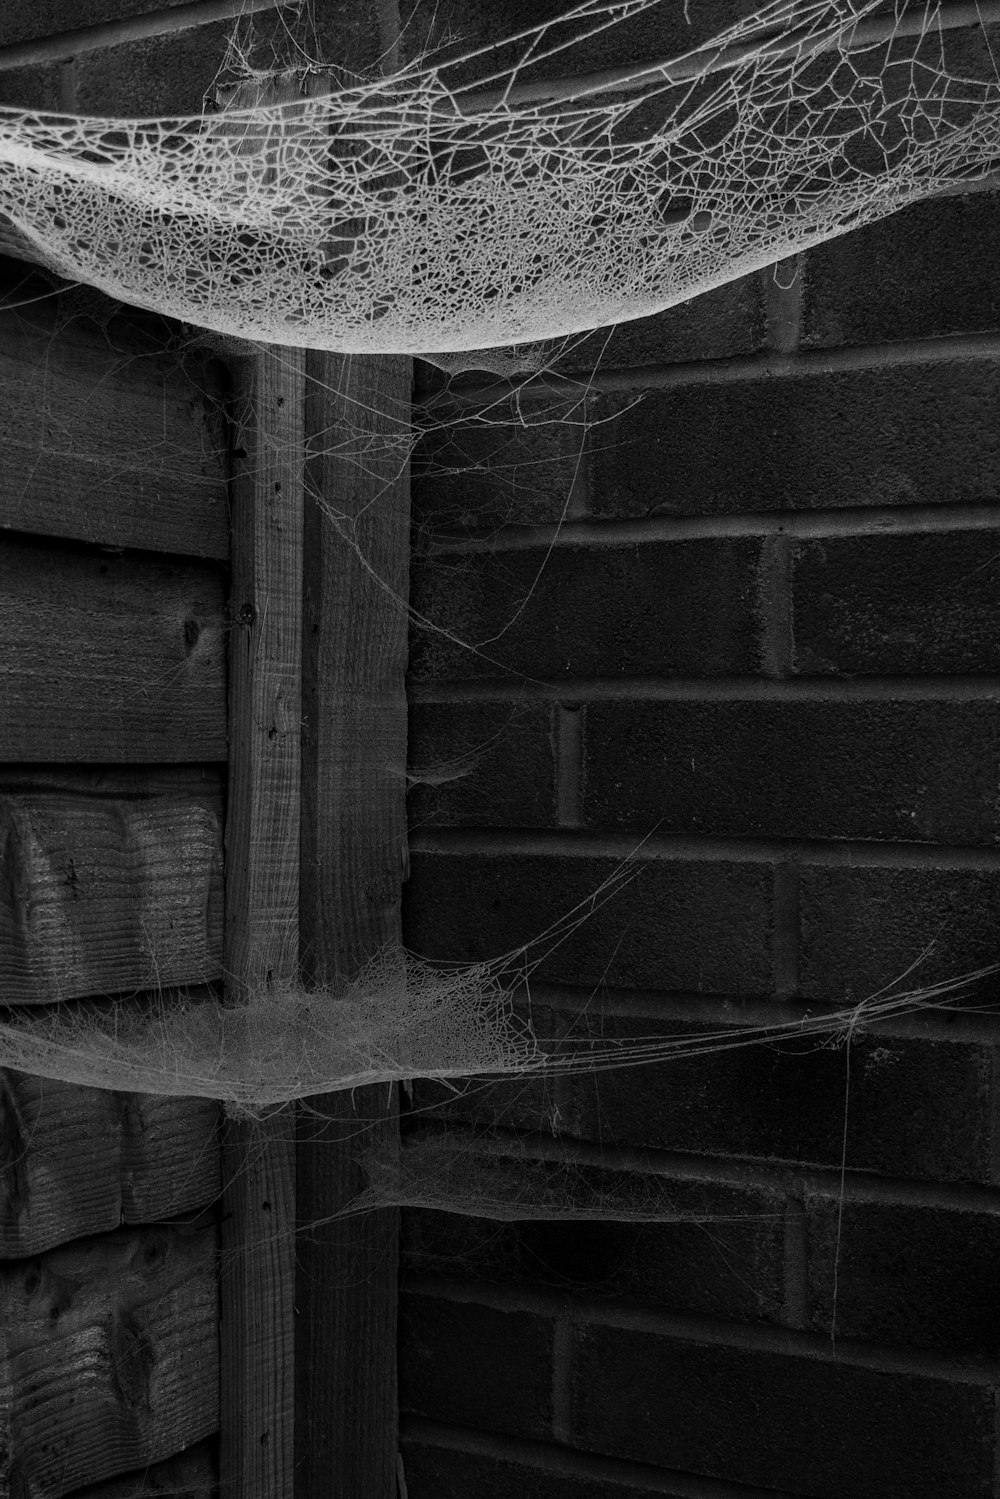 a black and white photo of a spider web